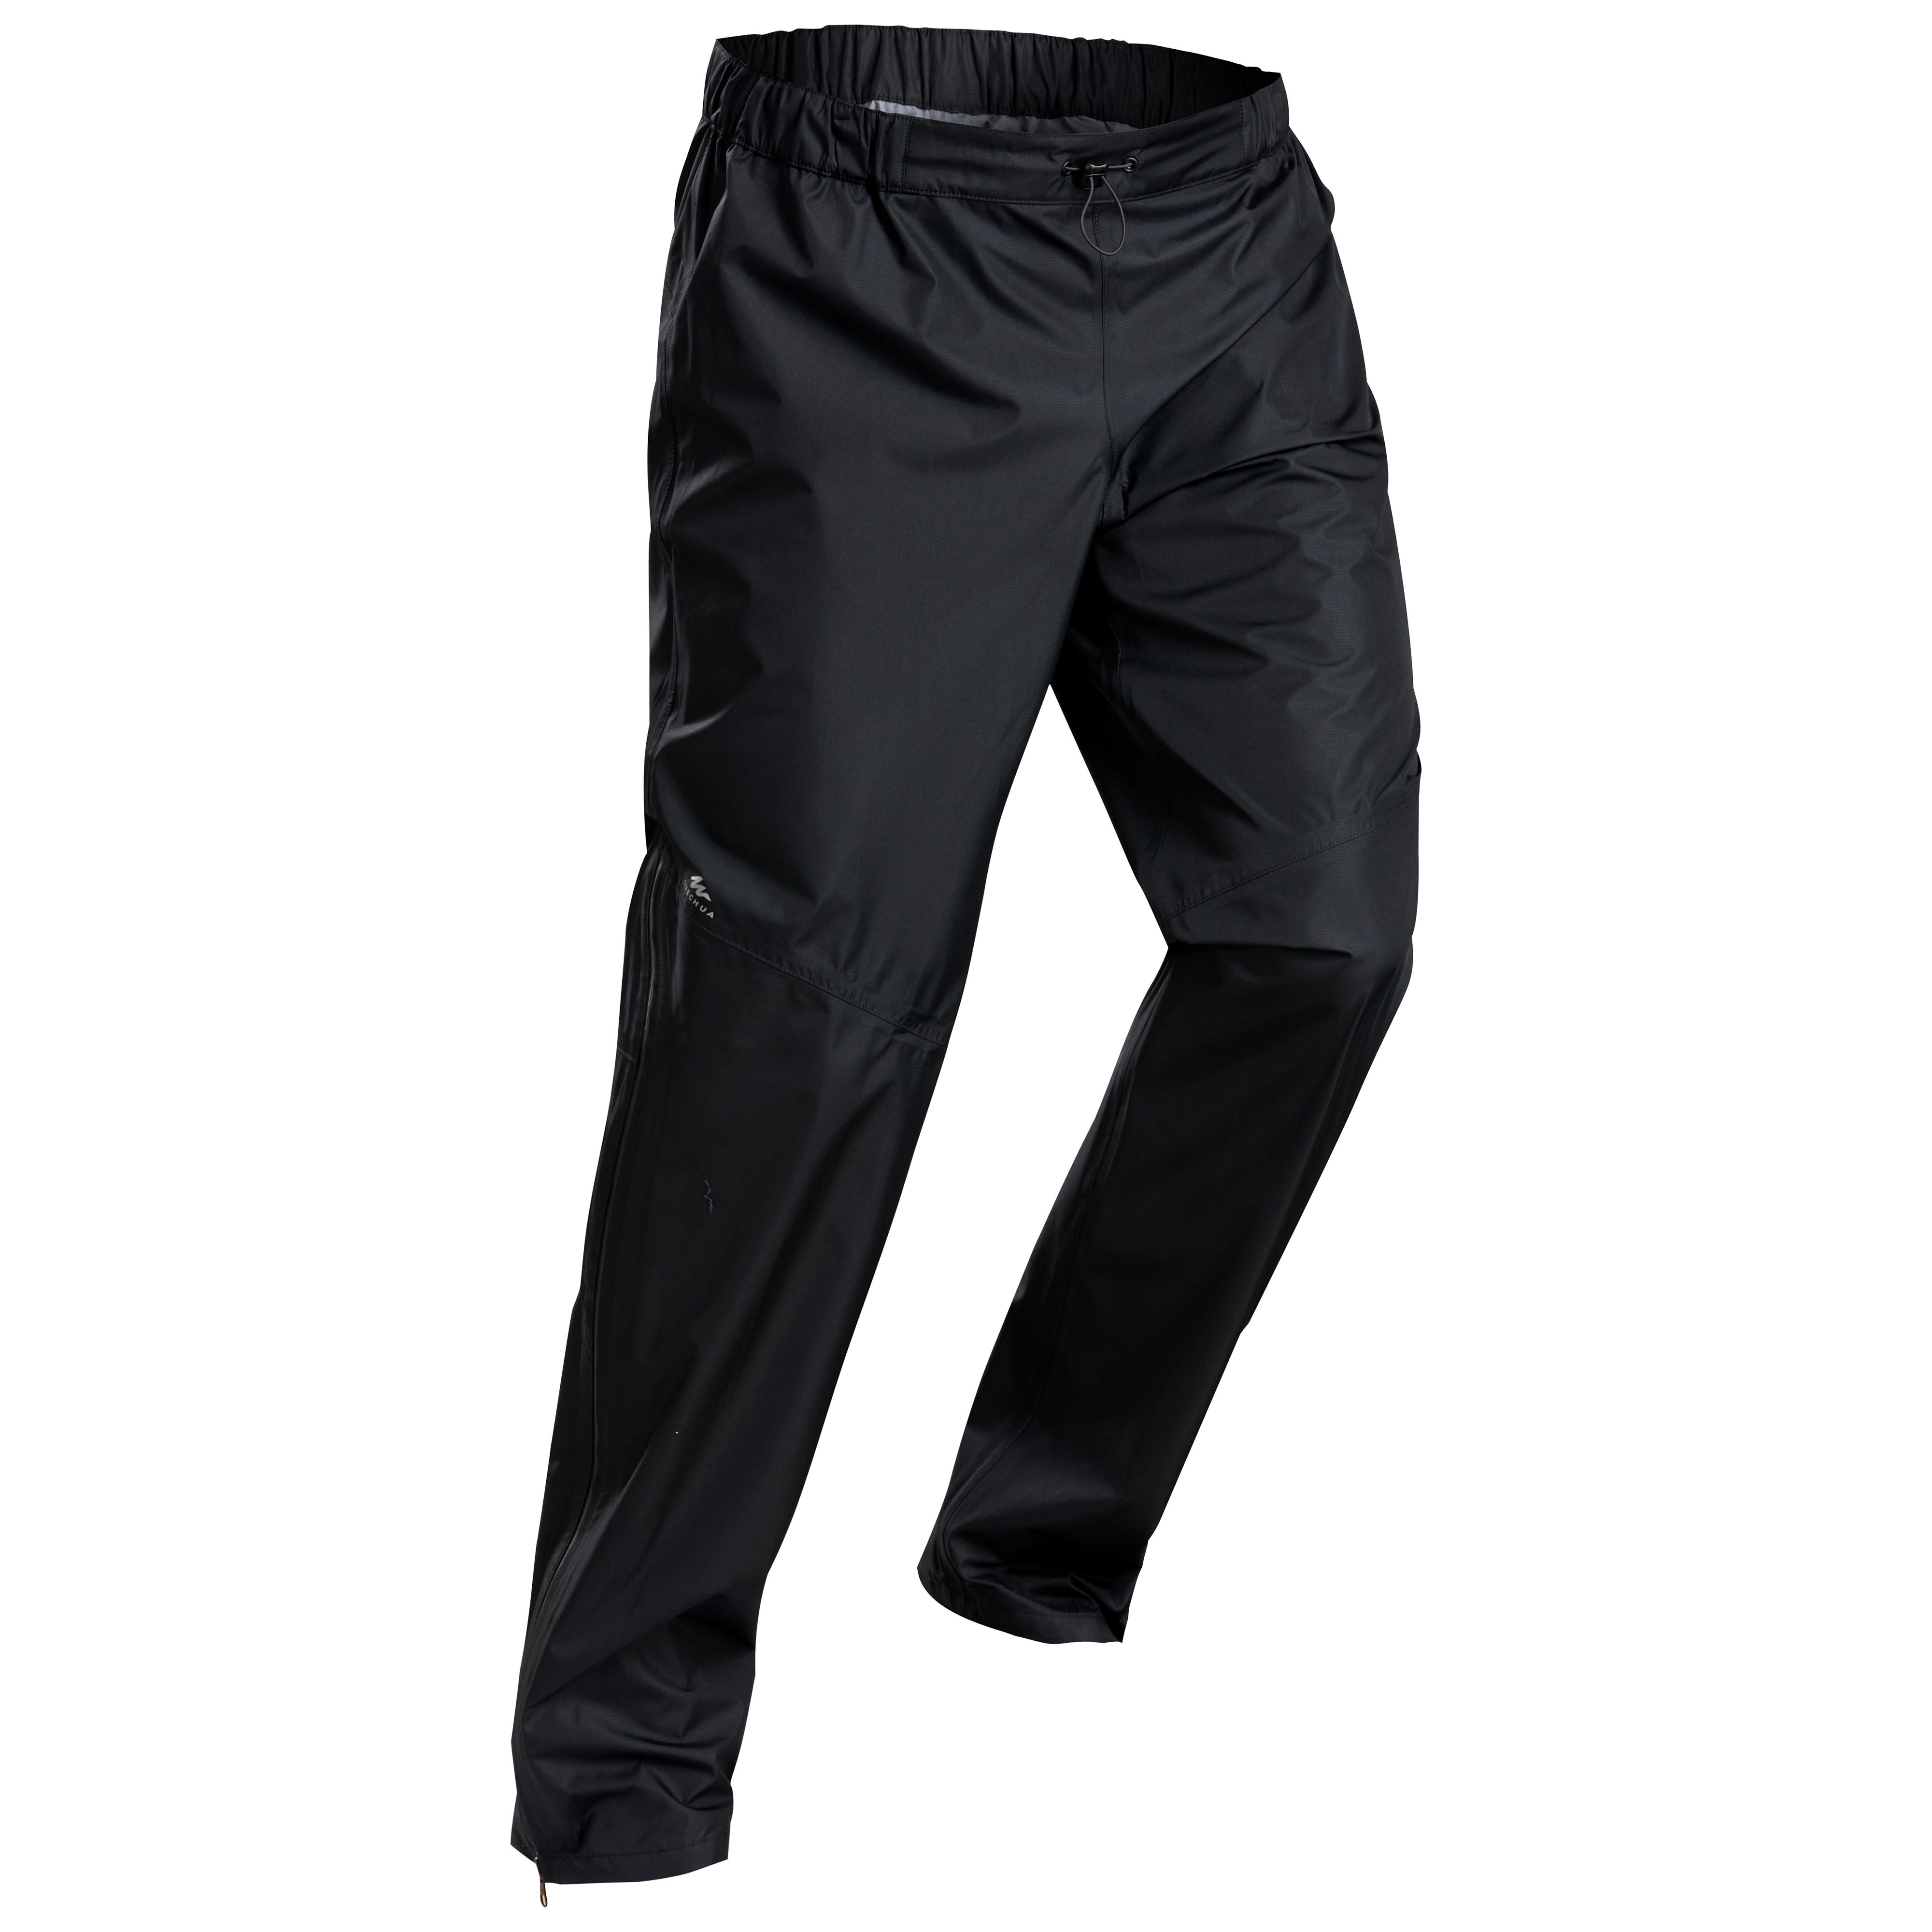 Men's City Cycling Rain Overtrousers with Built-In Overshoes 540 - Black